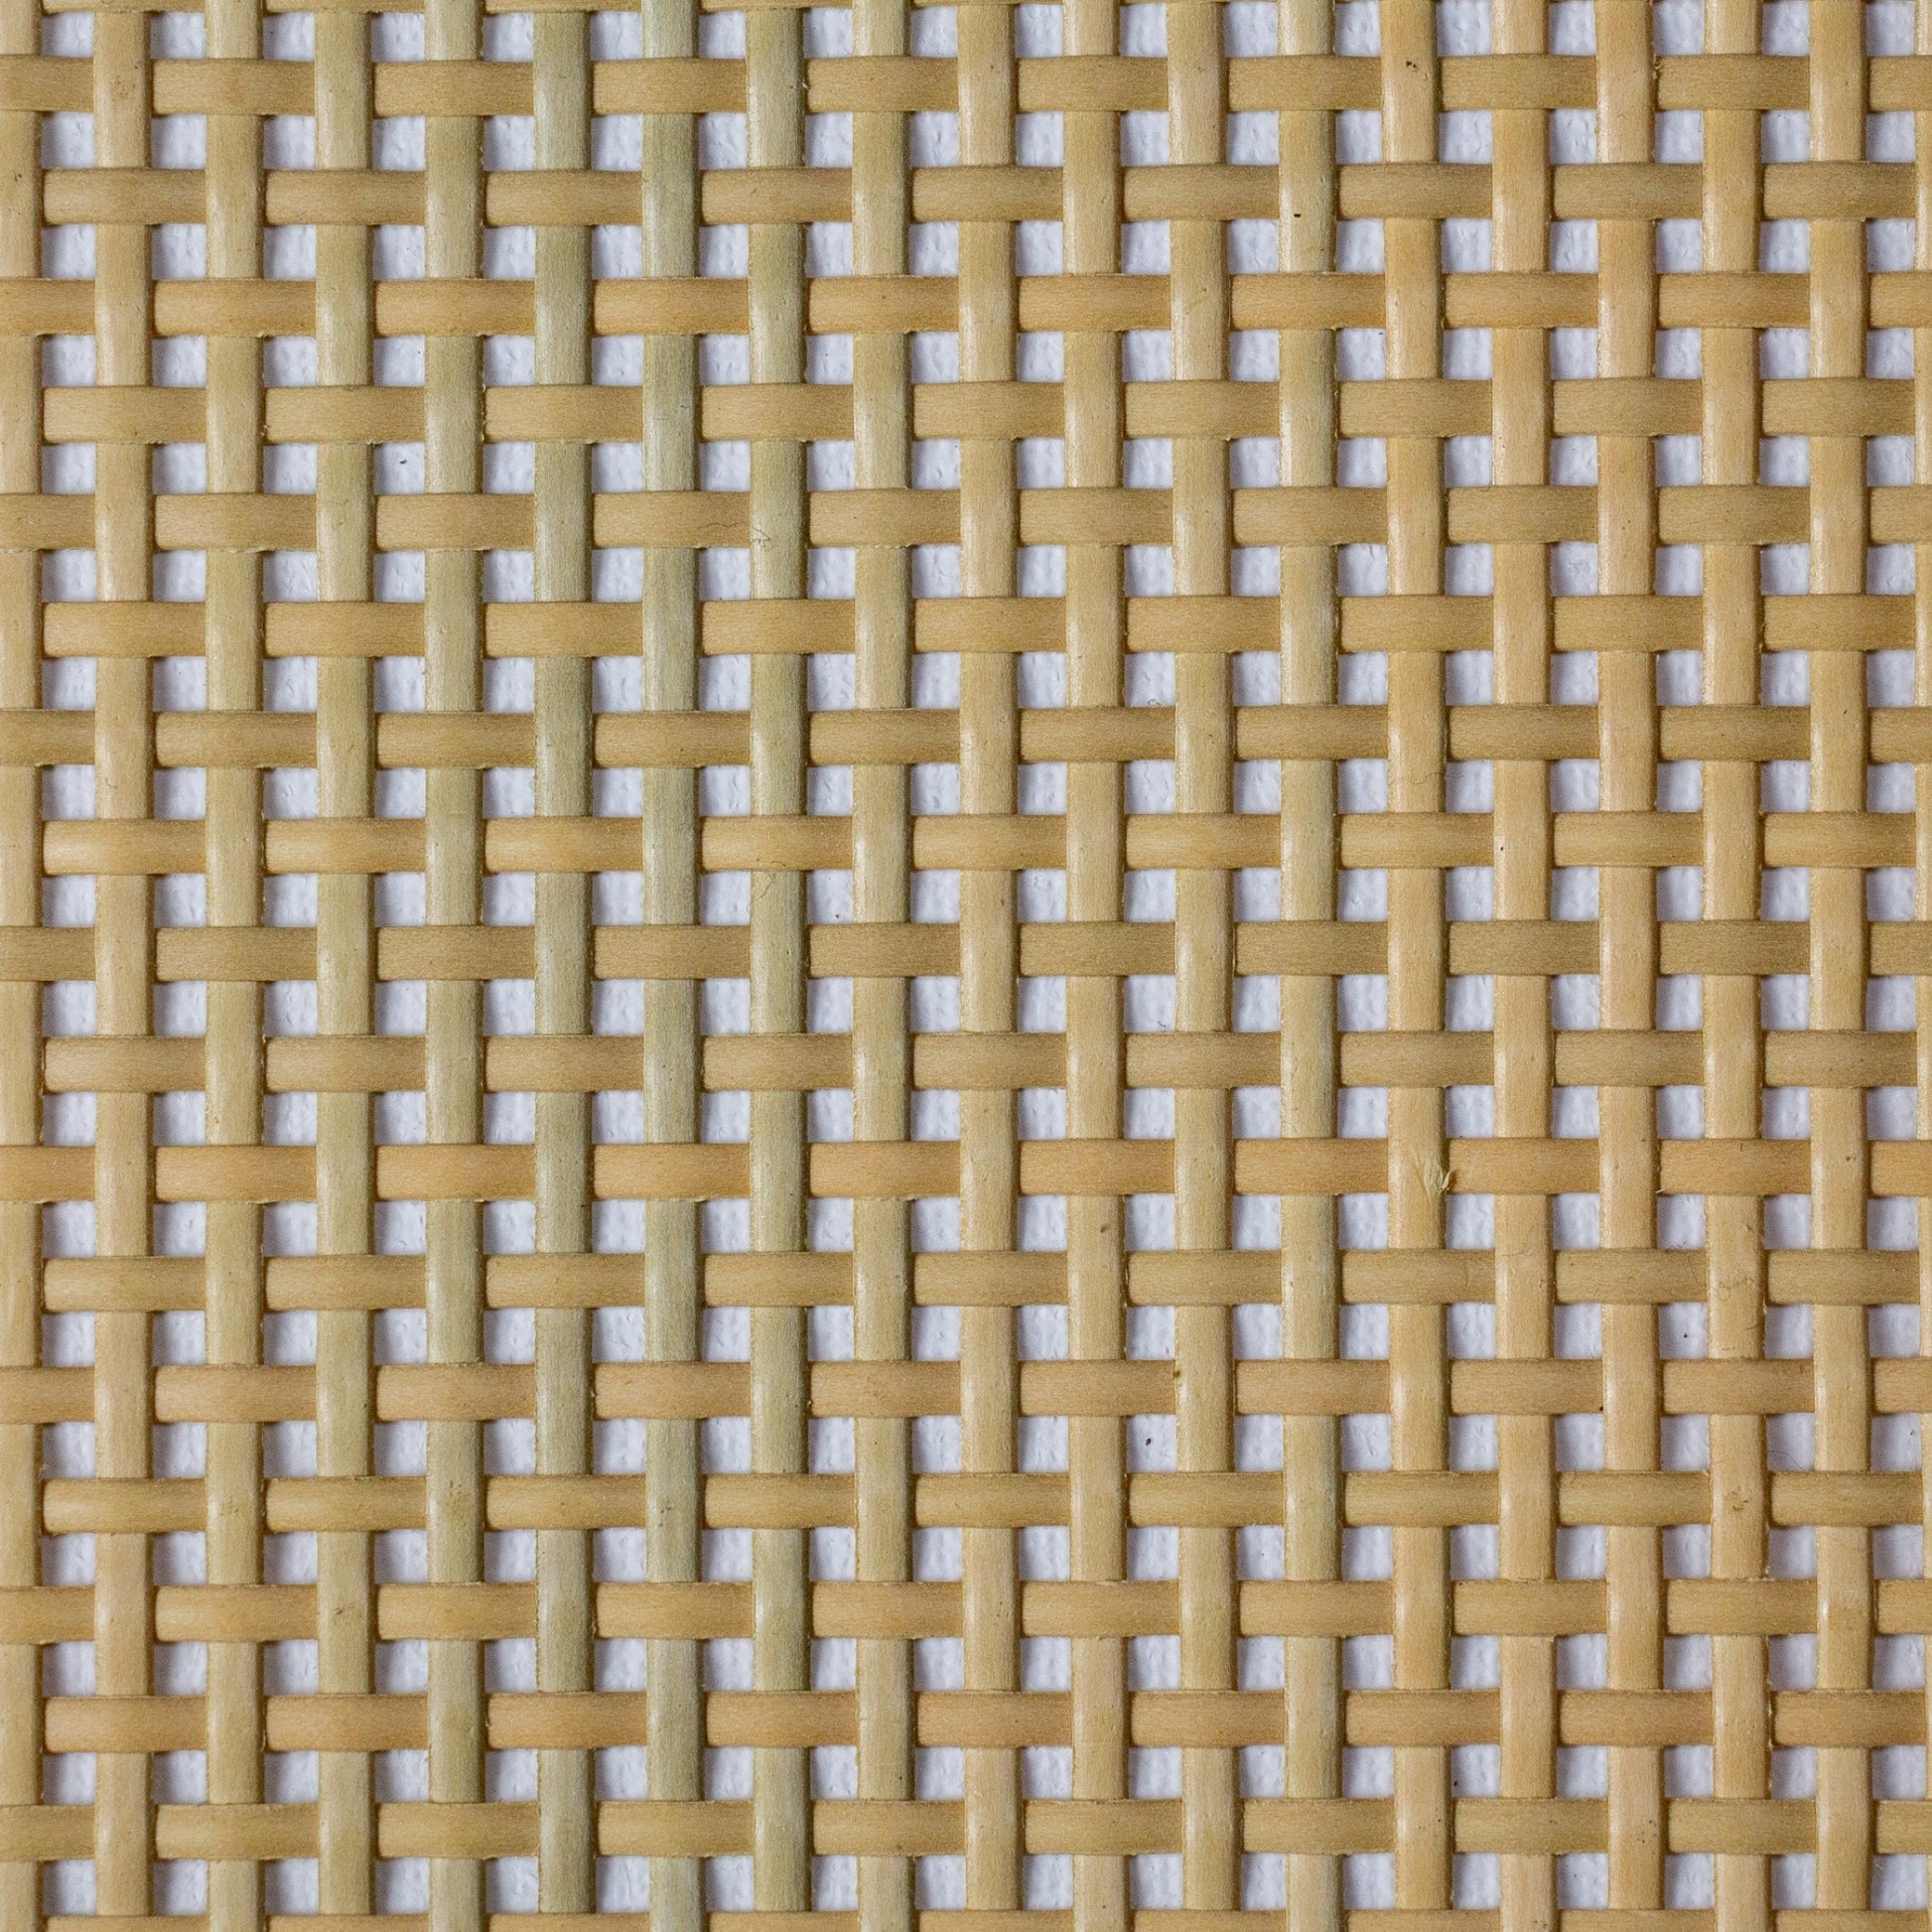 Plastic-Synthetic-Faux-PE-Rattan-Cane-Webbing-Mesh-Roll-Panel-Furniture-Chair-Repair-Open-Weave-Square-Radio-Melbourne-Australia-Natural-Brown-2